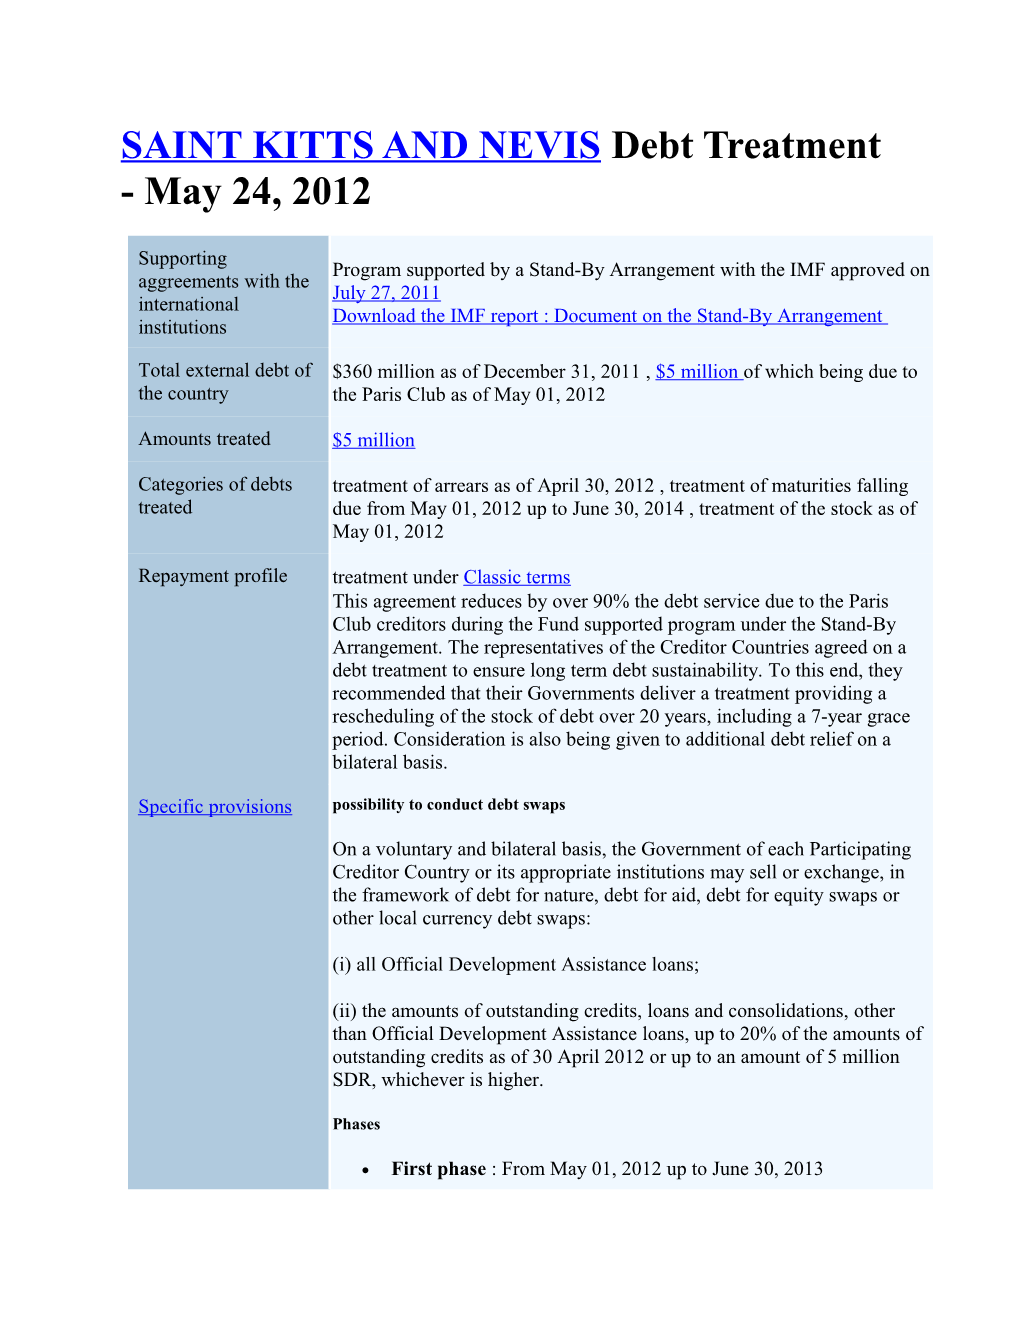 SAINT KITTS and NEVIS Debt Treatment - May 24, 2012